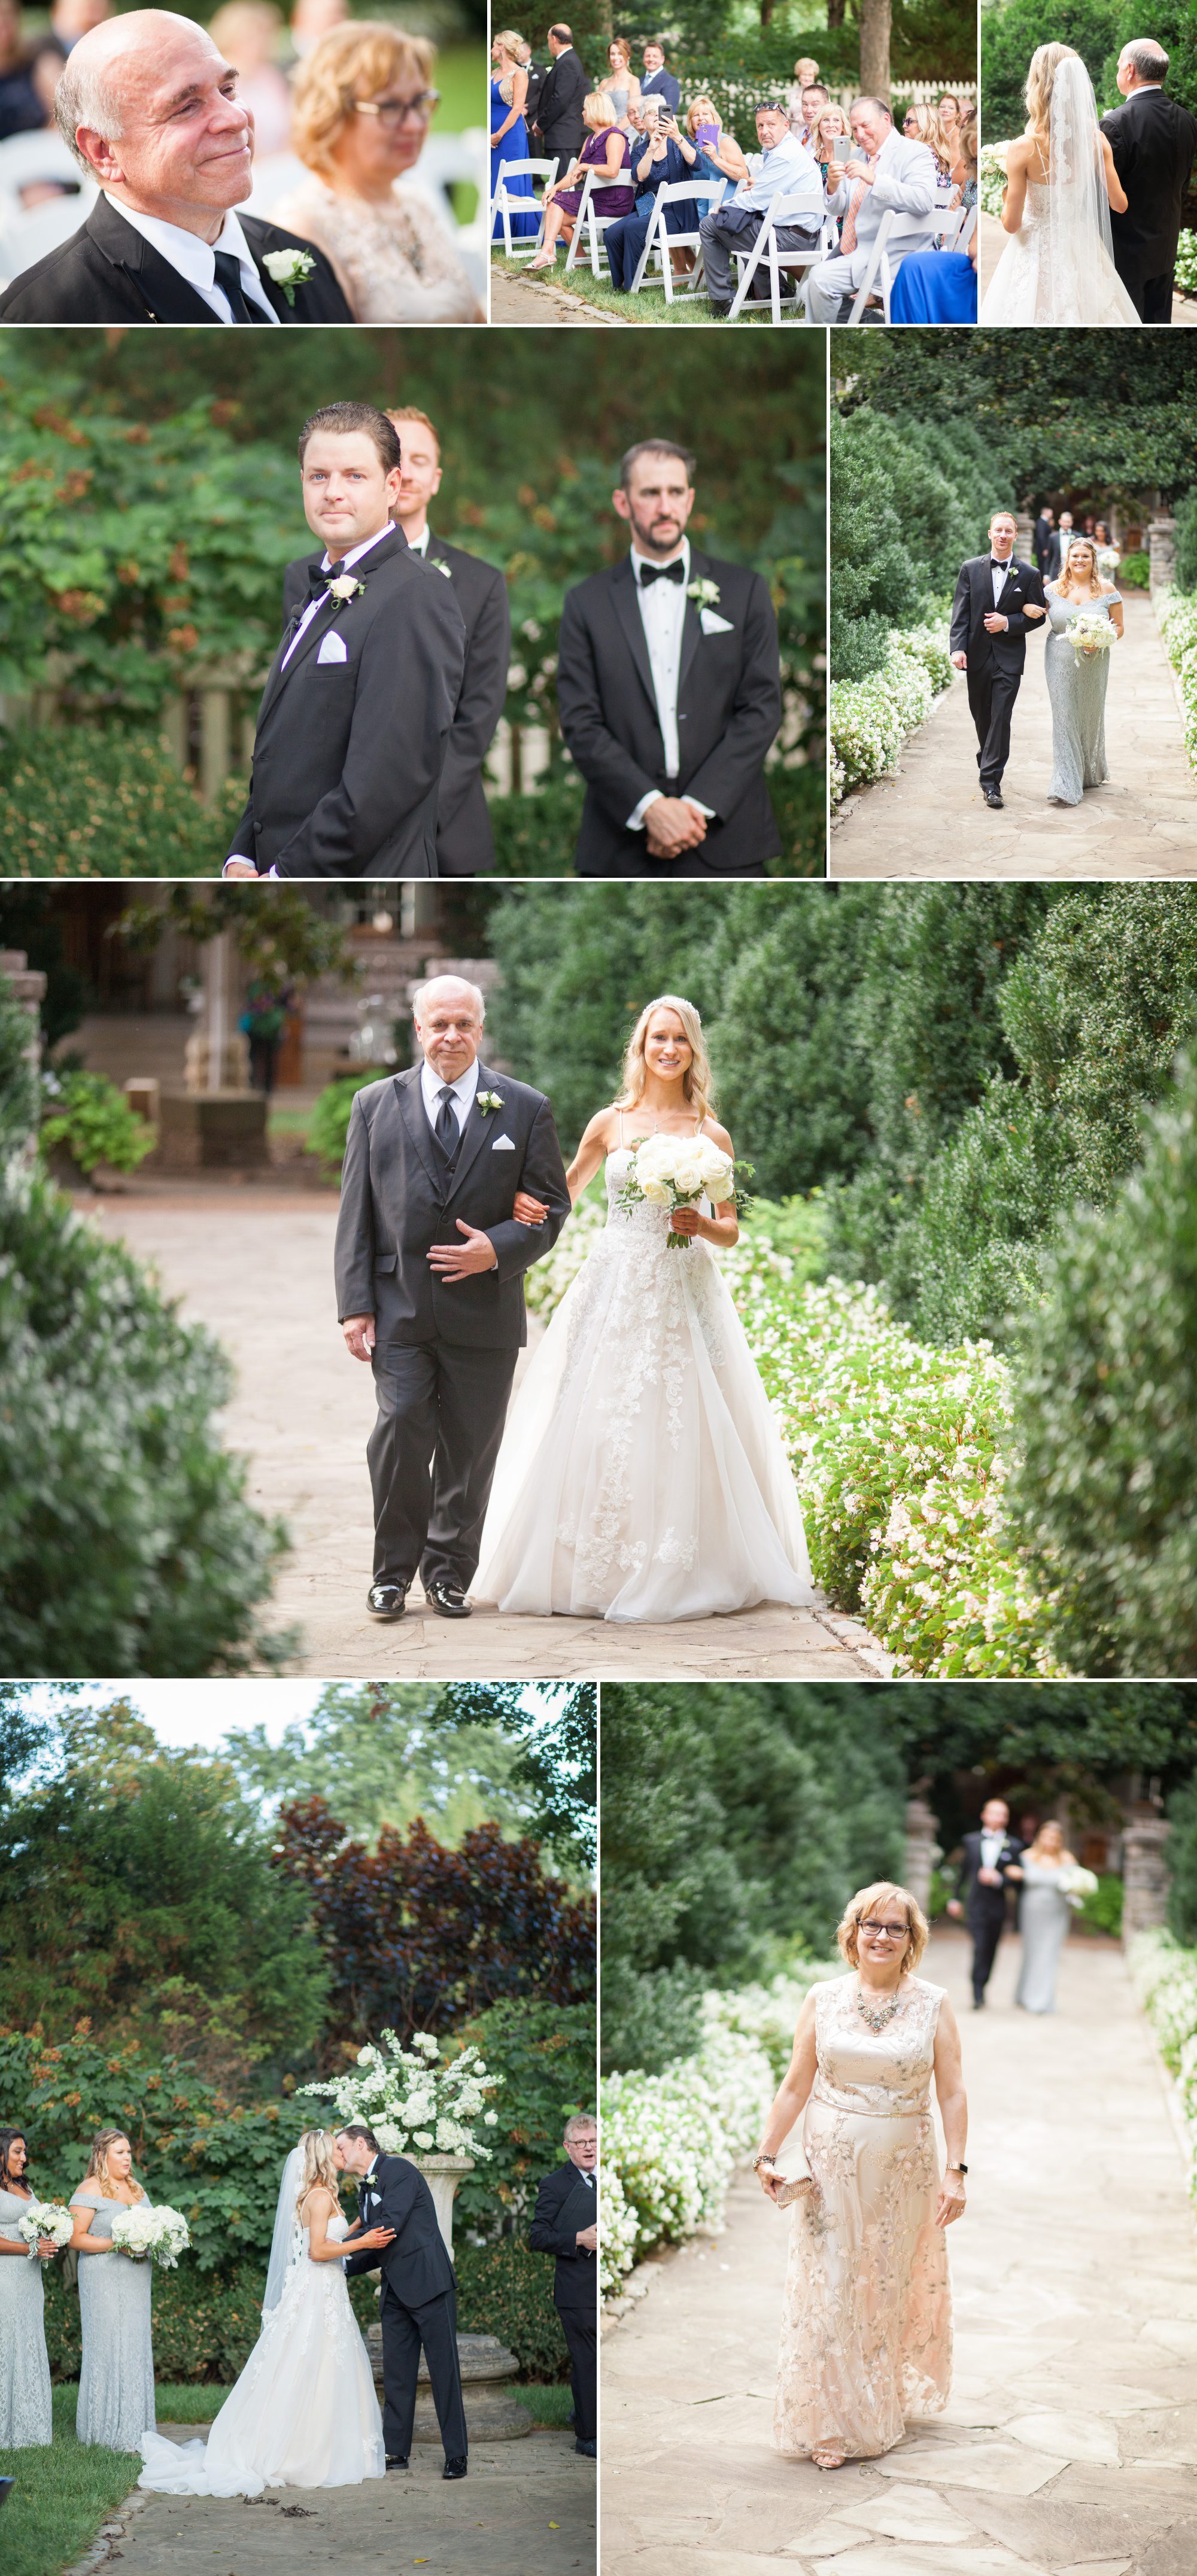 Ceremony processional and recessional at wedding before reception at Belle Meade Plantation in Nashville, TN. Photos by Krista Lee Photography 